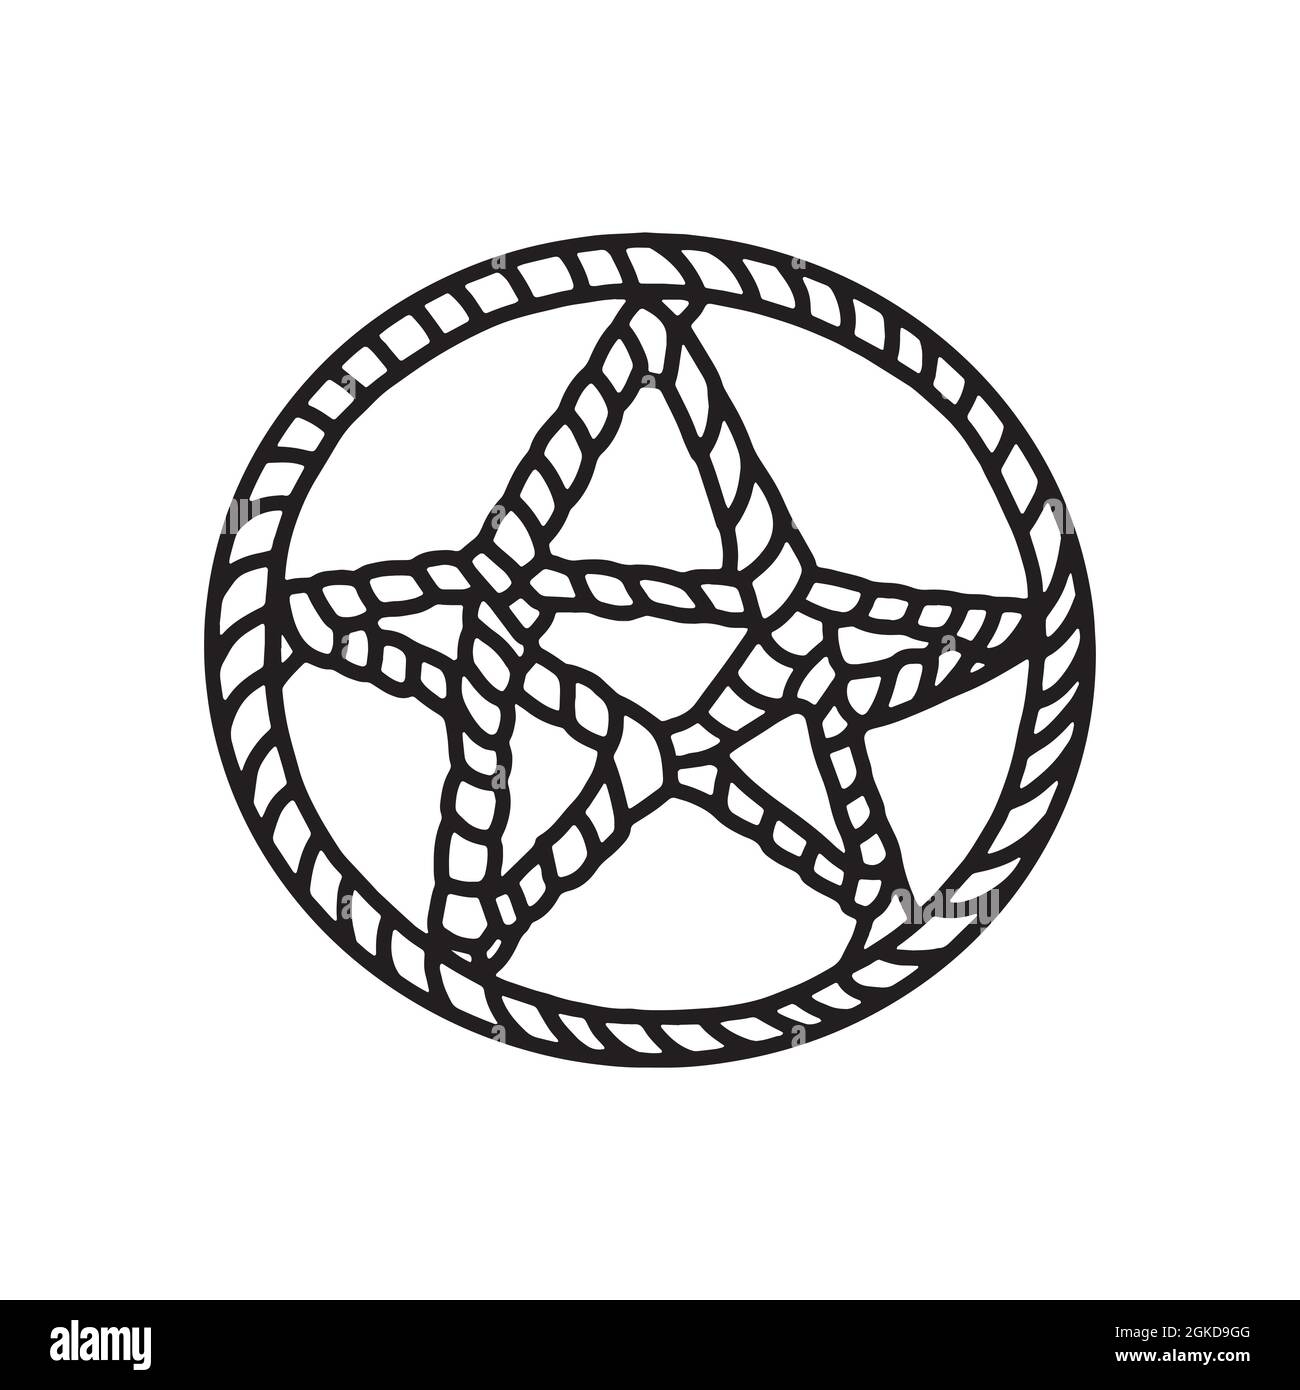 Pentagram symbol. Magic pentacle circle. Mystic and occult symbols. Halloween and esoteric witchcraft. Hand drawn sketch vector line. Stock Vector